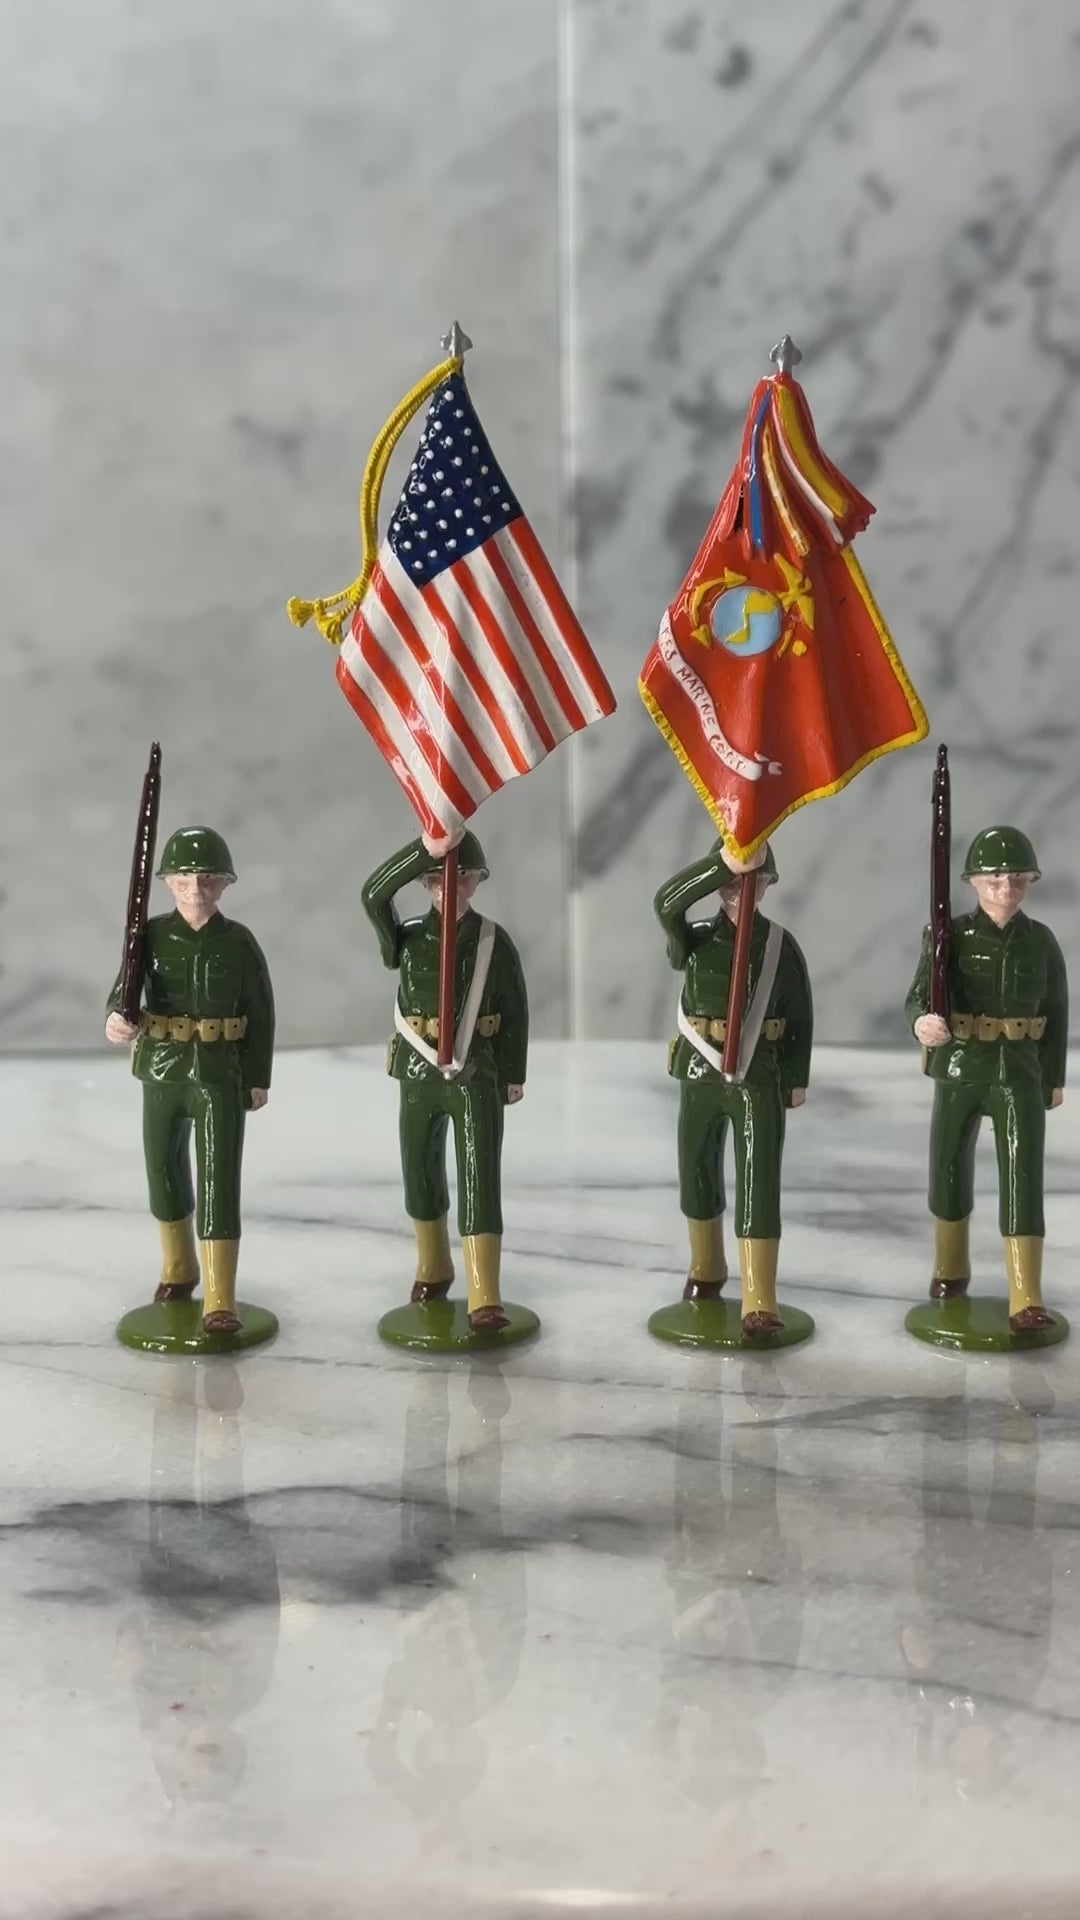 360 degree view of toy soldier set Marine Color Guard WWII with music.